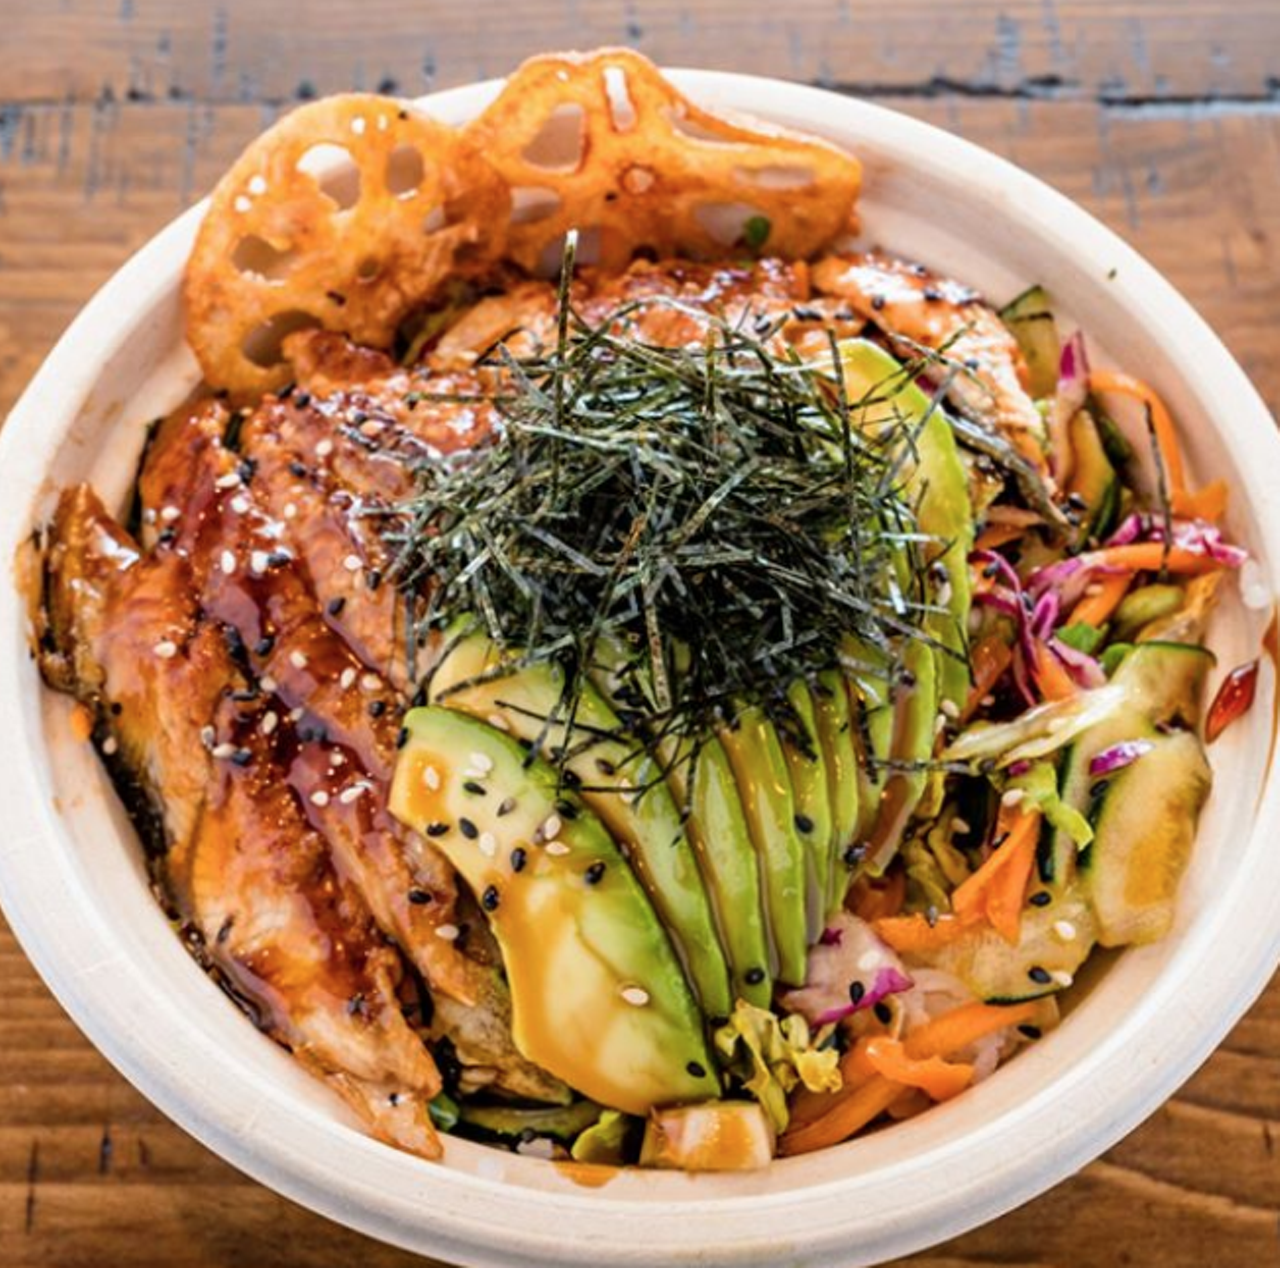 Hula Poke
Multiple locations, facebook.com/HulaPokeBandera
With locations throughout SA, you can always hit up Hula Poke when hunger strikes. In addition to sushi burritos, you can score fresh-as-heck bowls of poke that give an equal emphasis on protein and produce.
Photo via Instagram / hulapokebandera